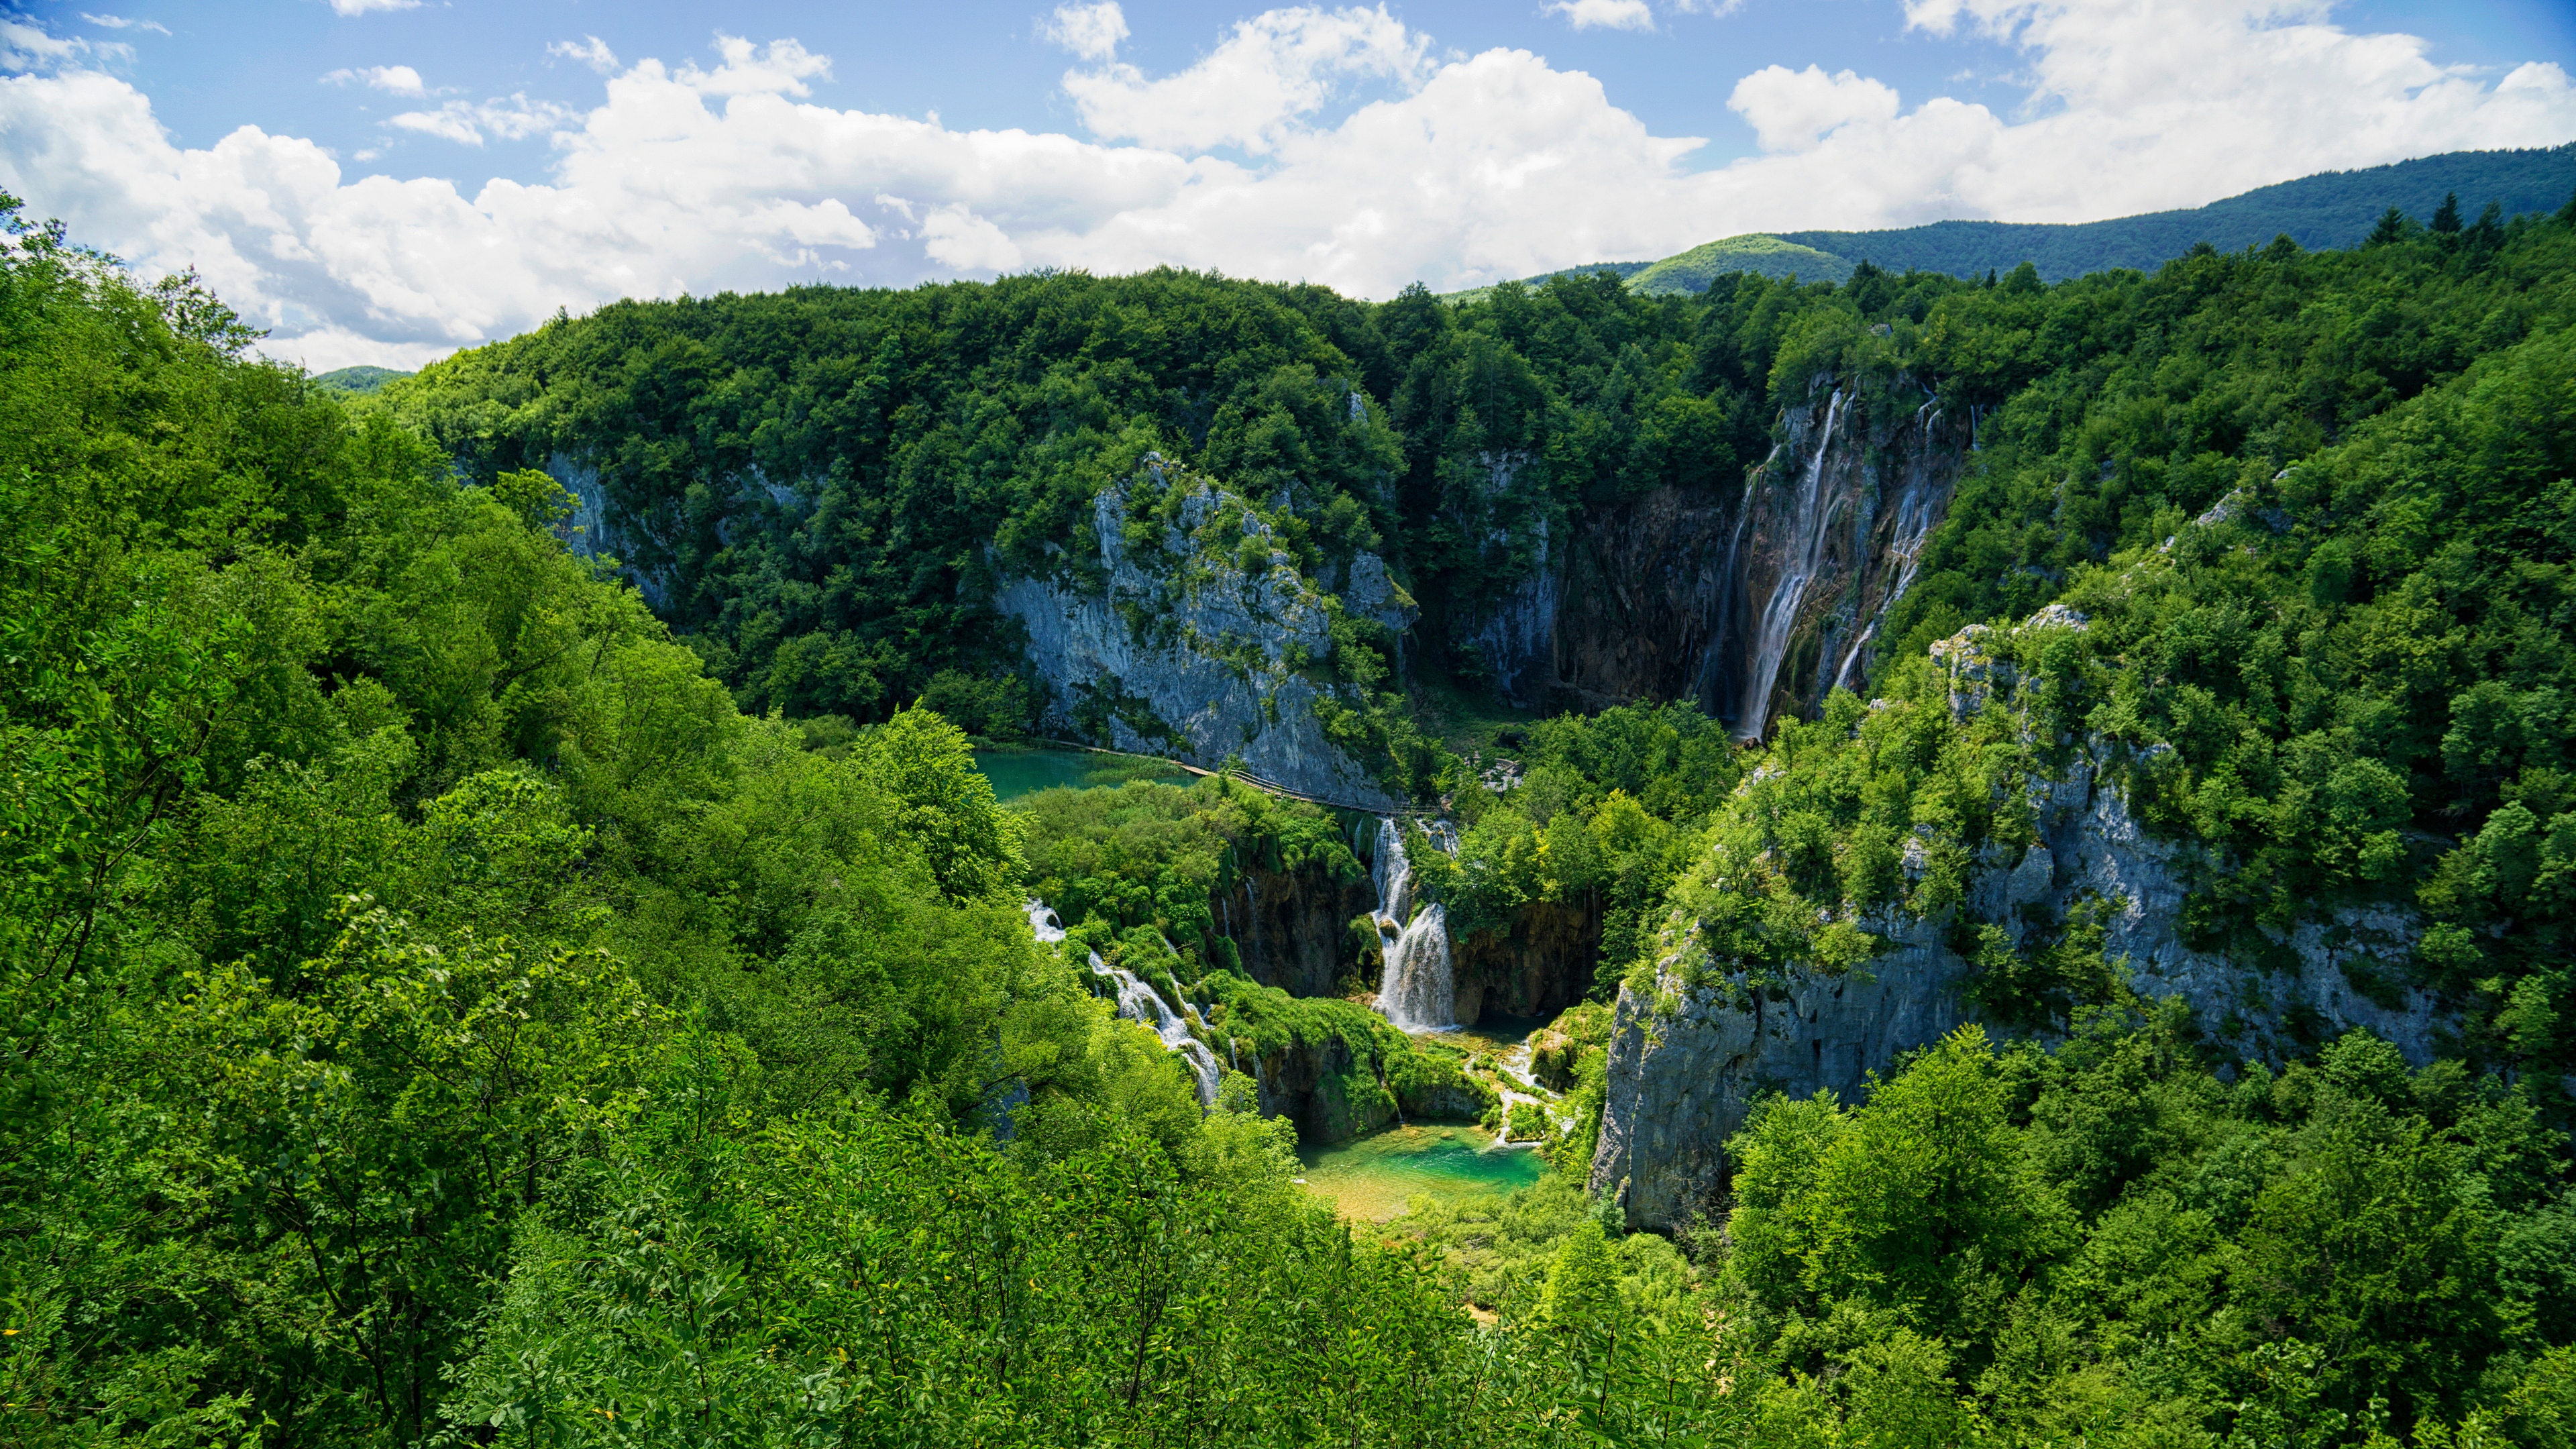 General 3840x2160 nature forest plants clouds Croatia Plitvice Lakes National Park Europe